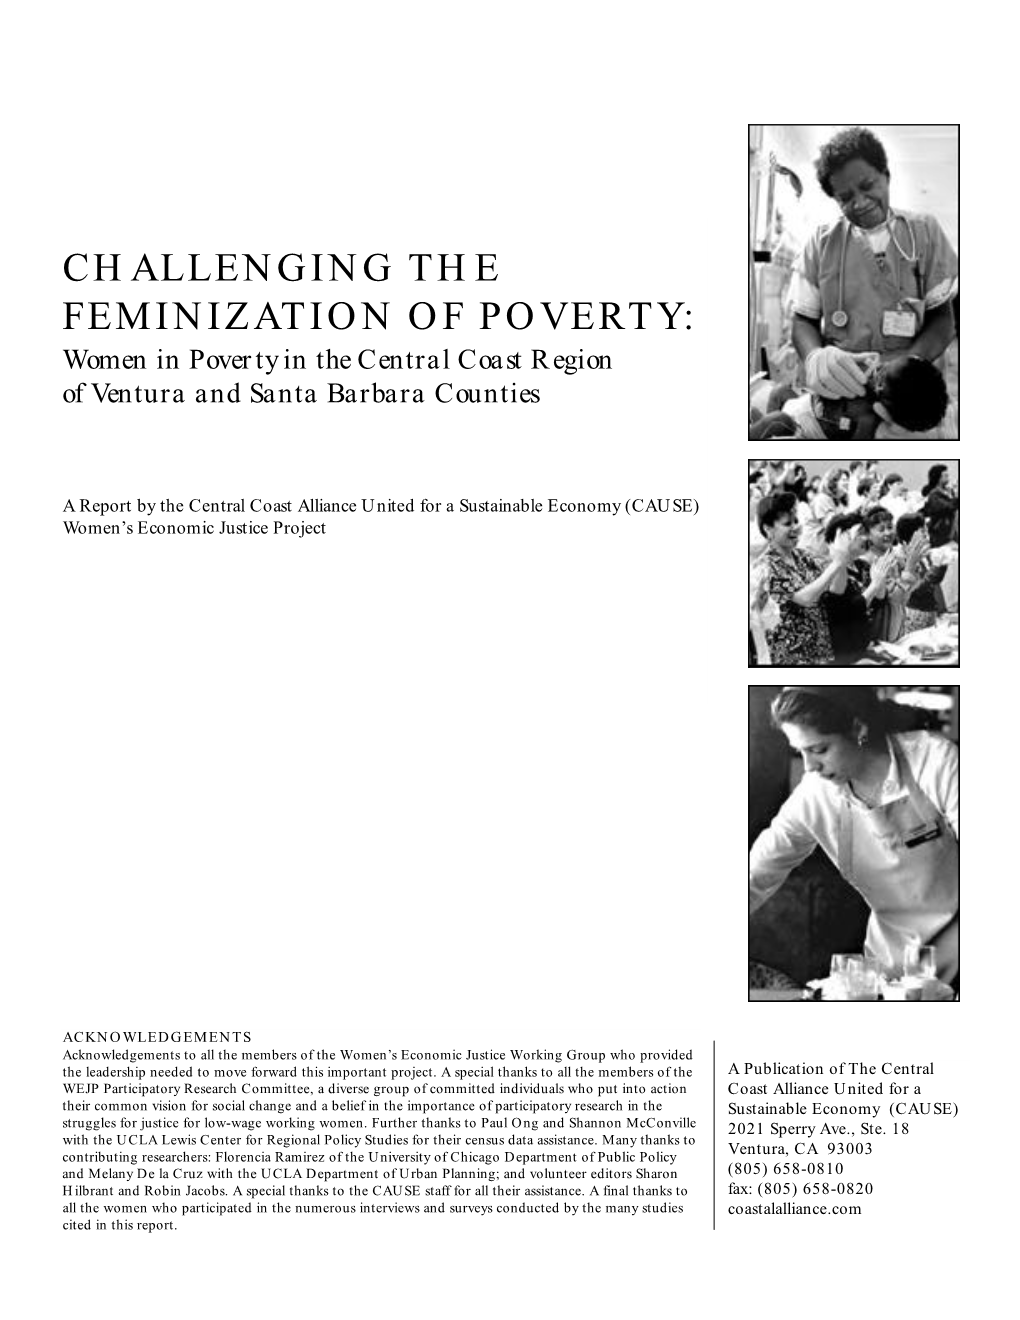 CHALLENGING the FEMINIZATION of POVERTY: Women in Poverty in the Central Coast Region of Ventura and Santa Barbara Counties